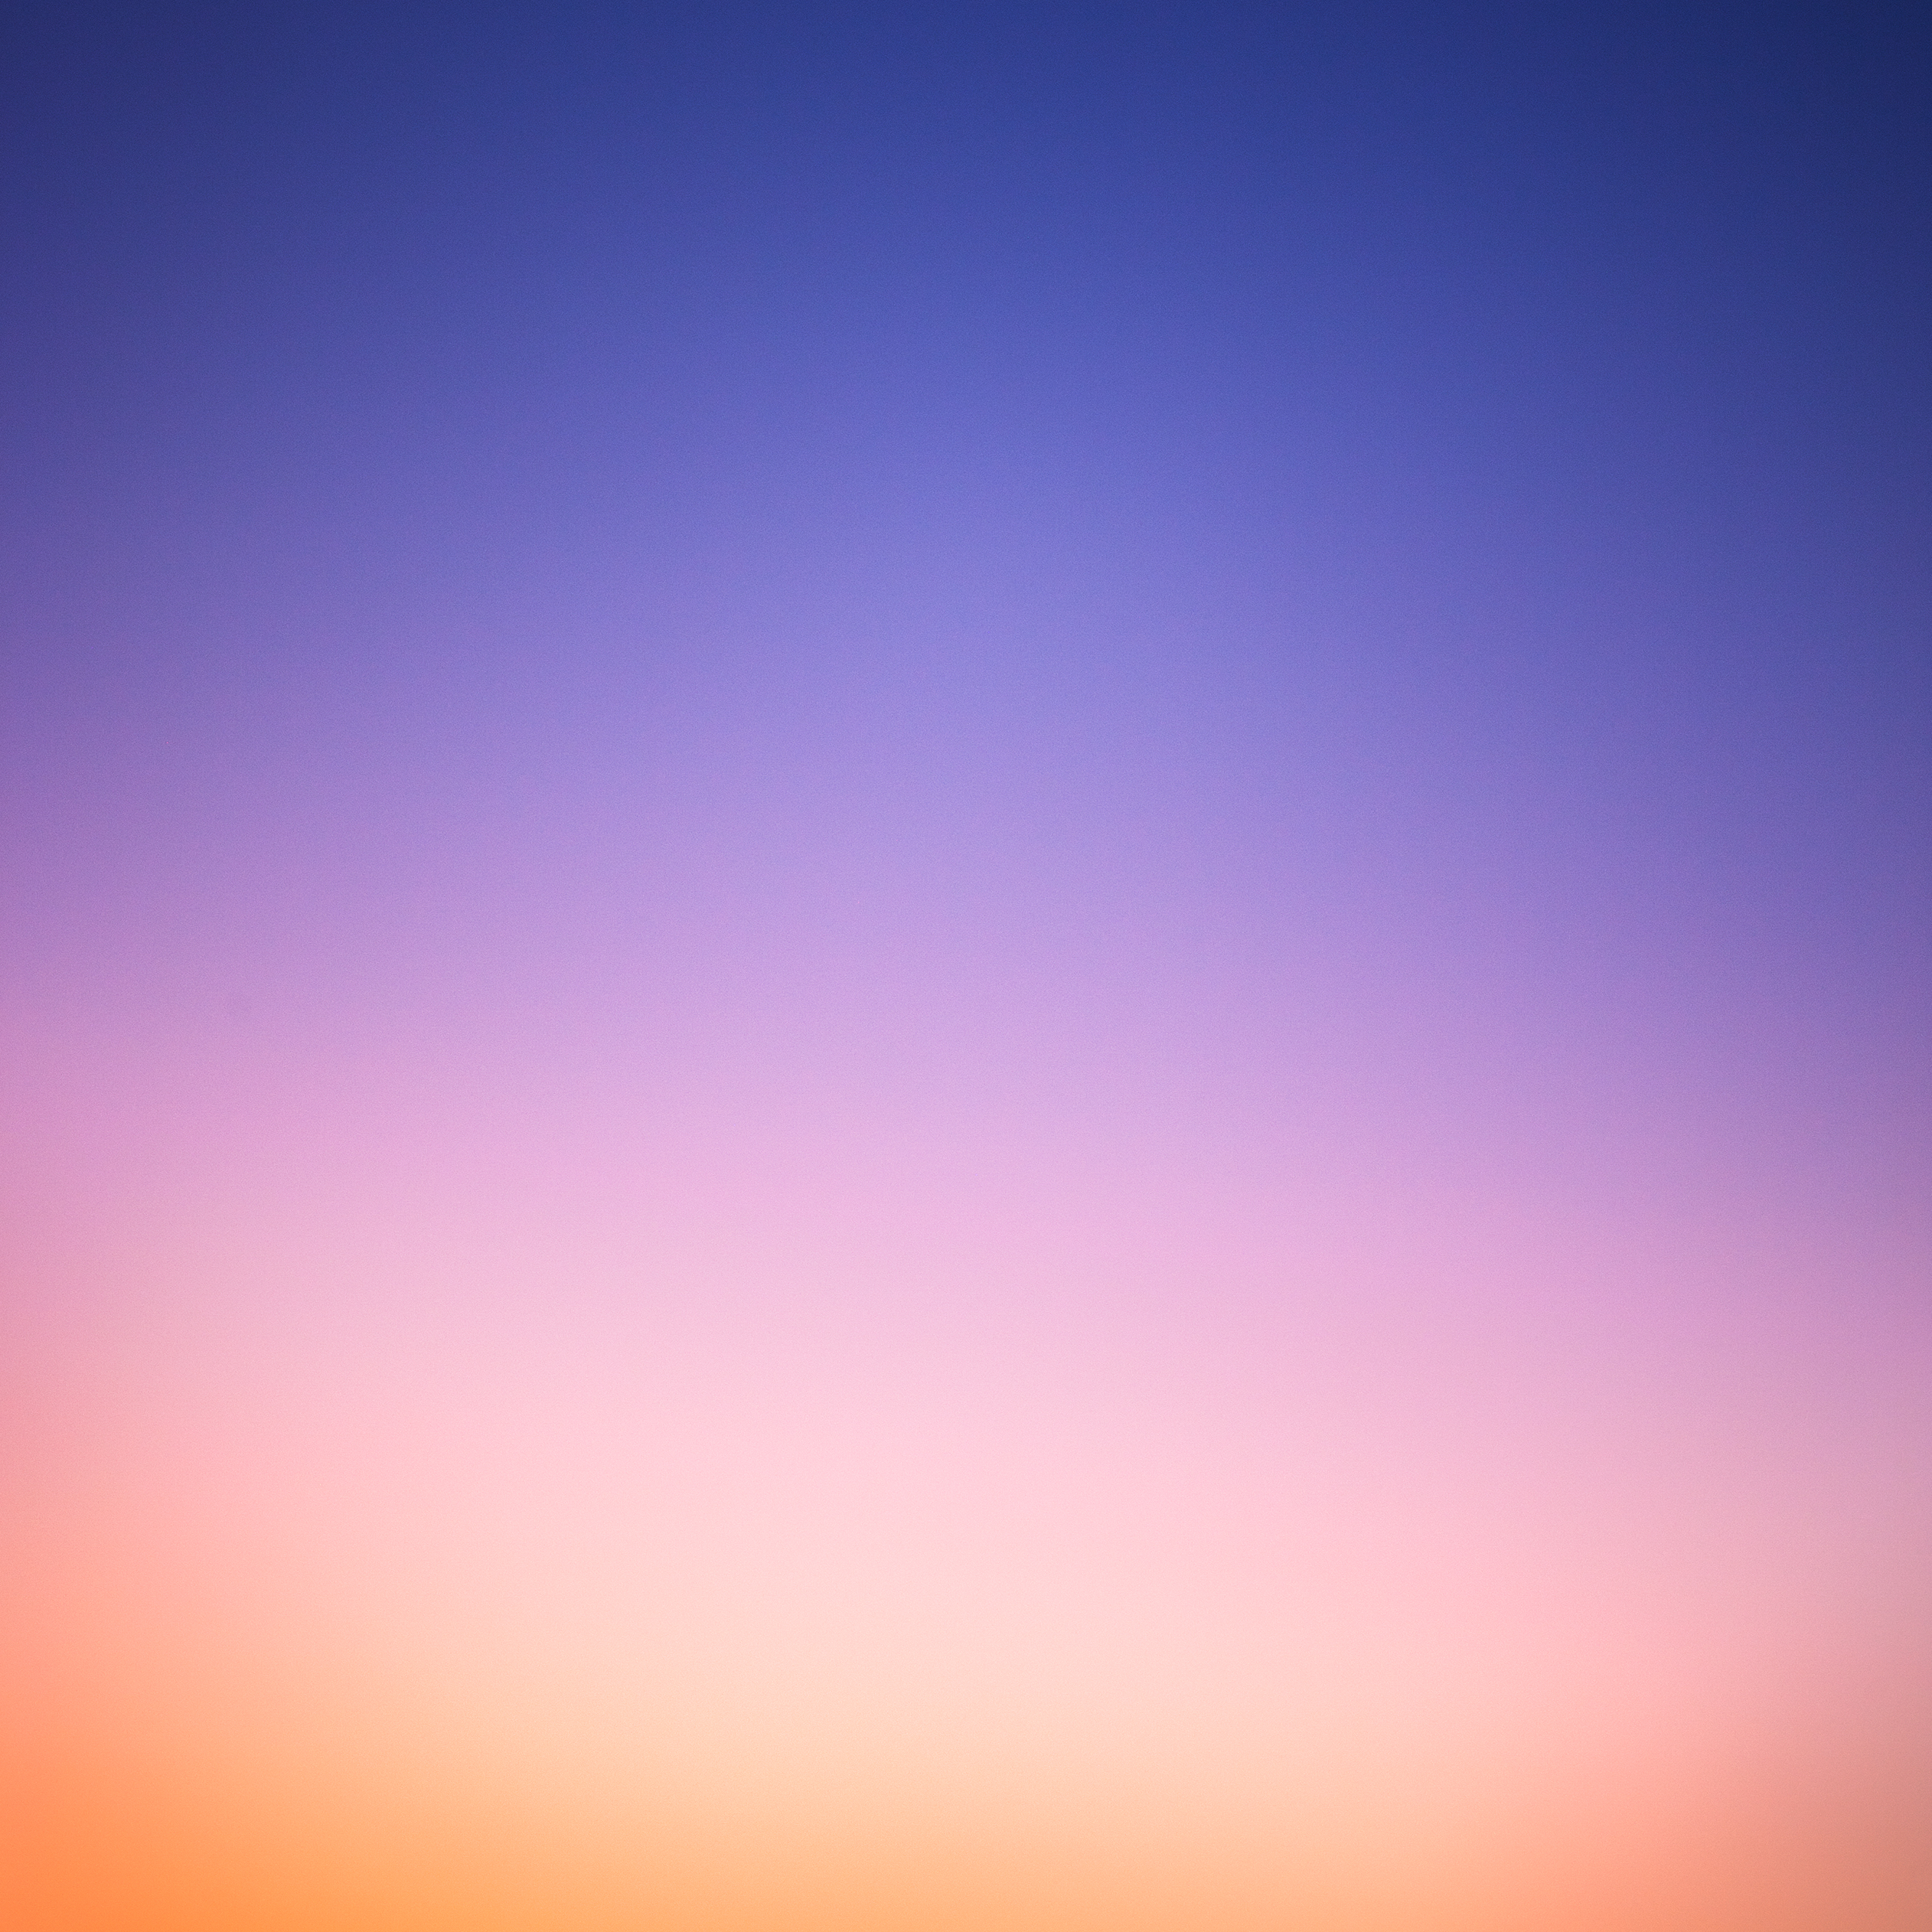 iOS7 wallpapers